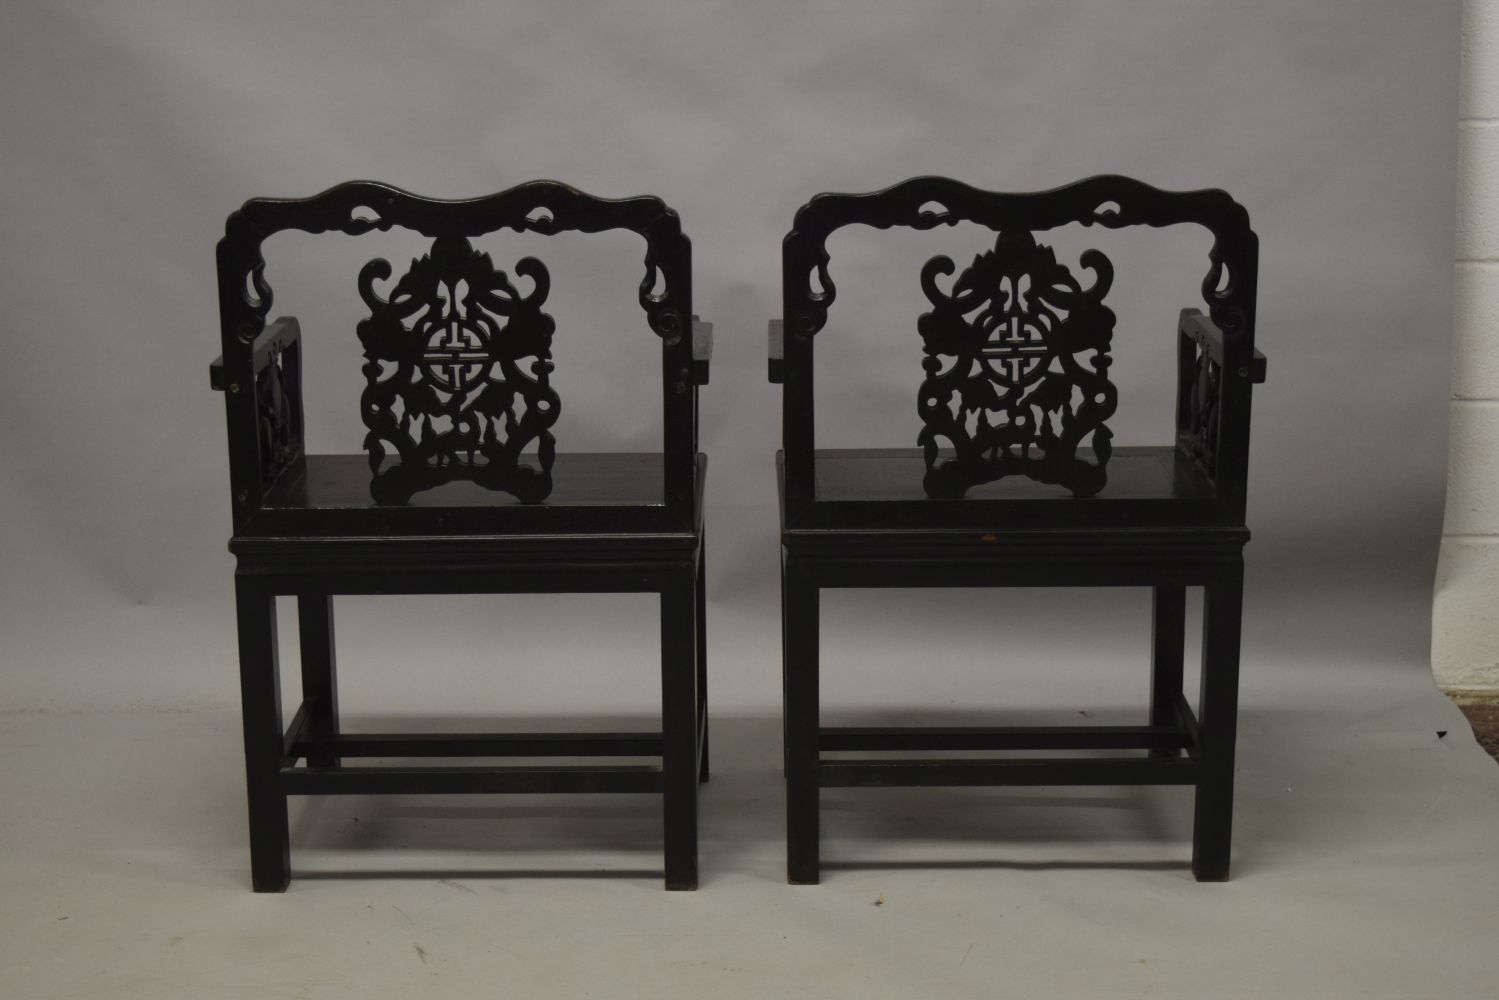 A GOOD PAIR OF CHINESE CARVED HARDWOOD CHAIRS, inlaid with mother of pearl - Image 5 of 5